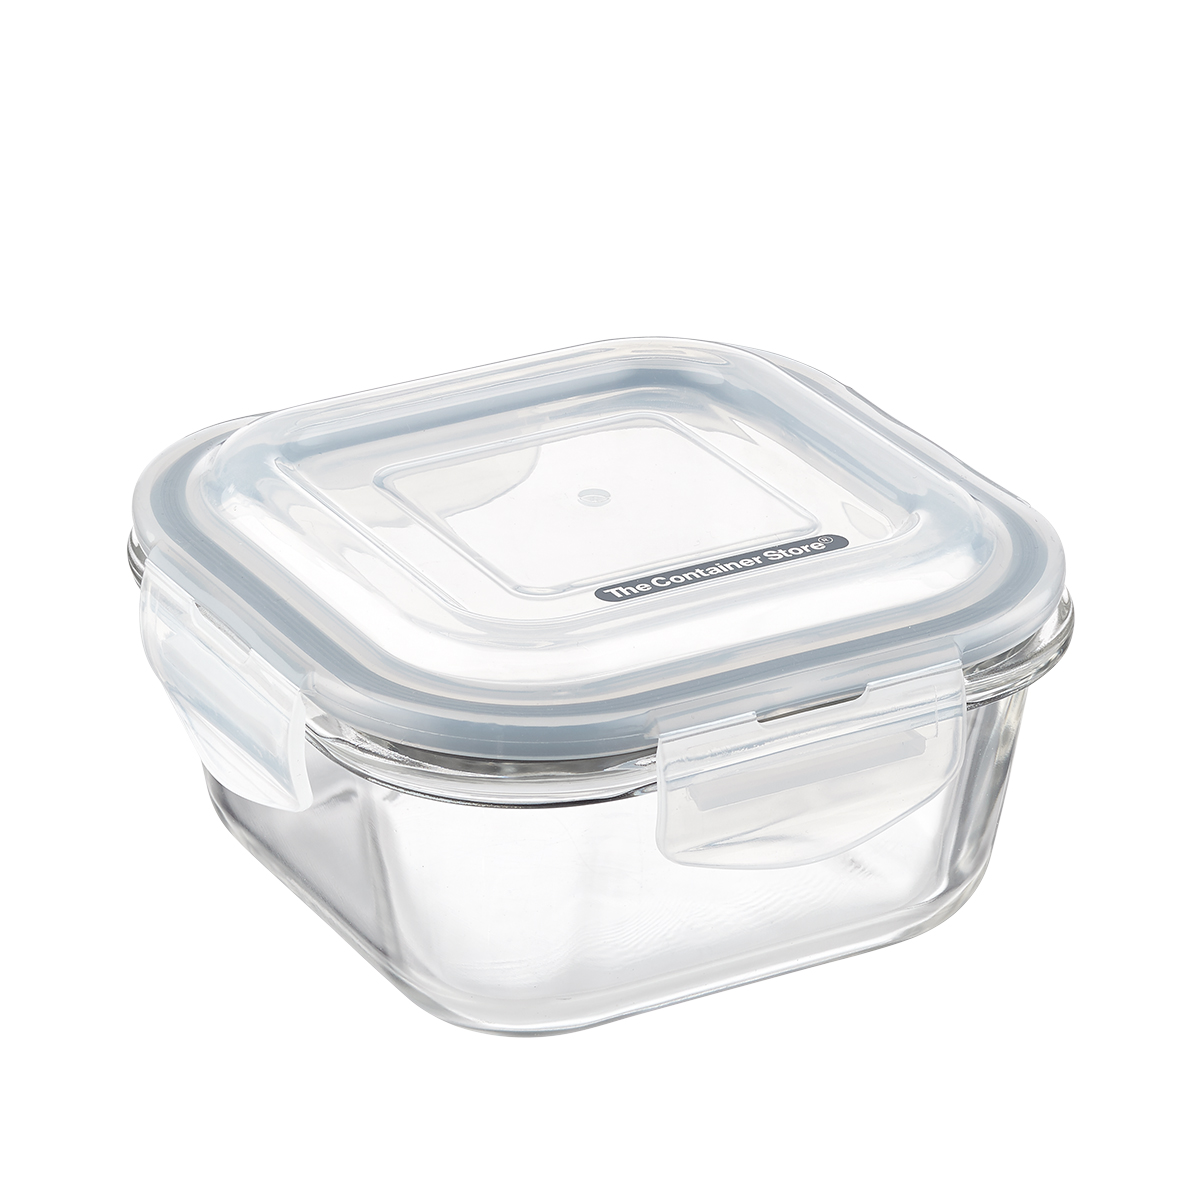 https://www.containerstore.com/catalogimages/383223/10078987-borosilicate-food-storage-s.jpg